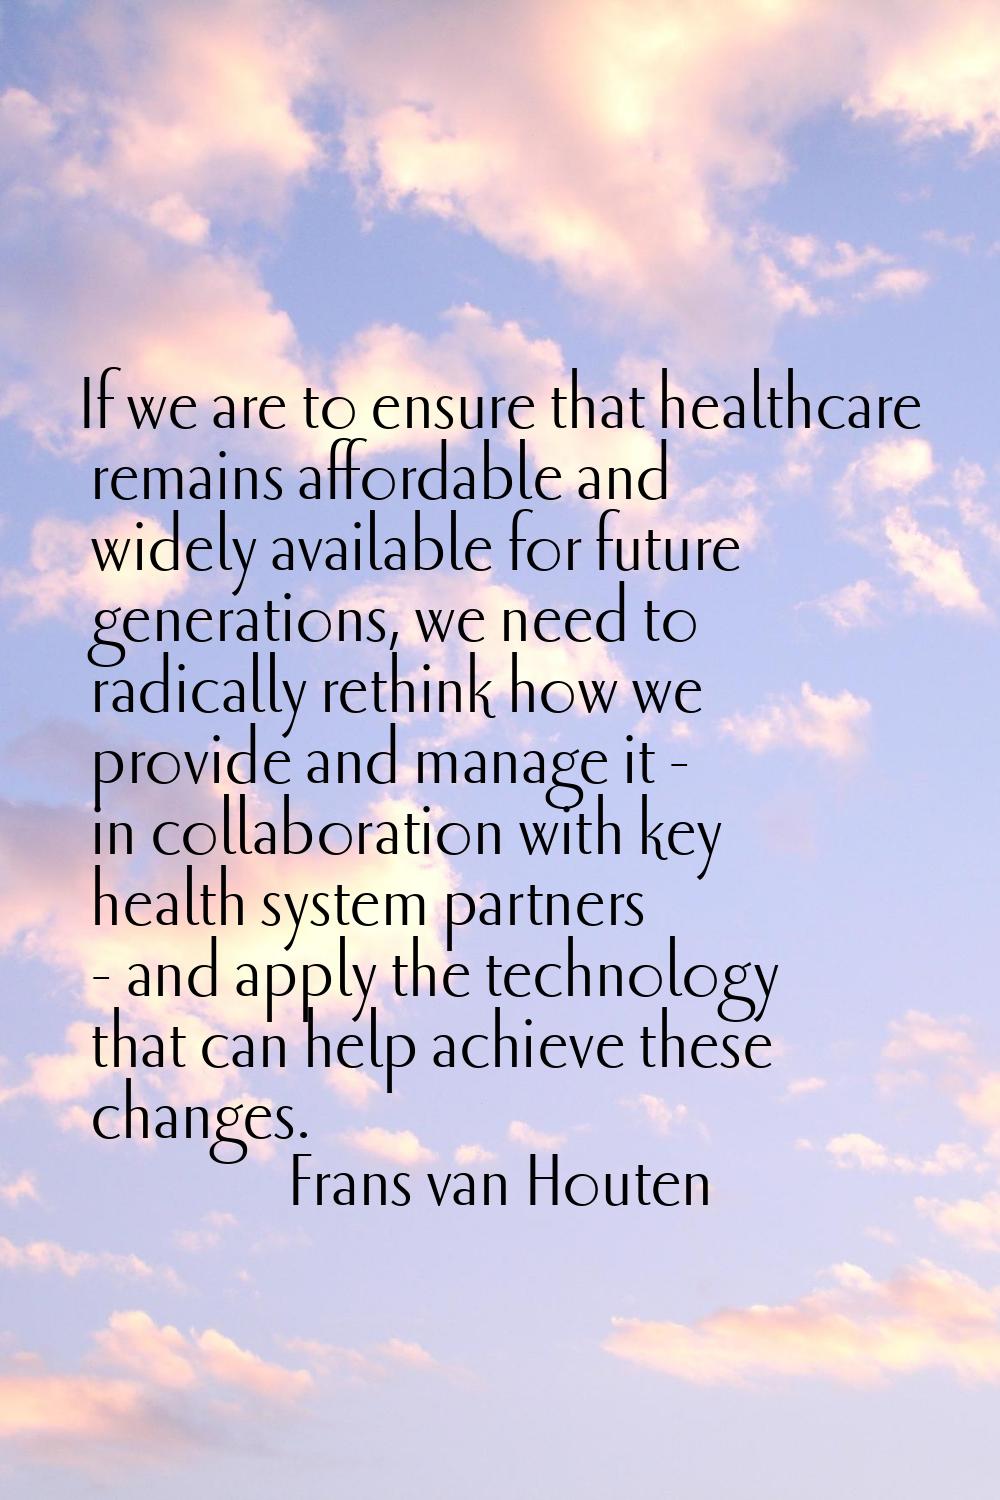 If we are to ensure that healthcare remains affordable and widely available for future generations,